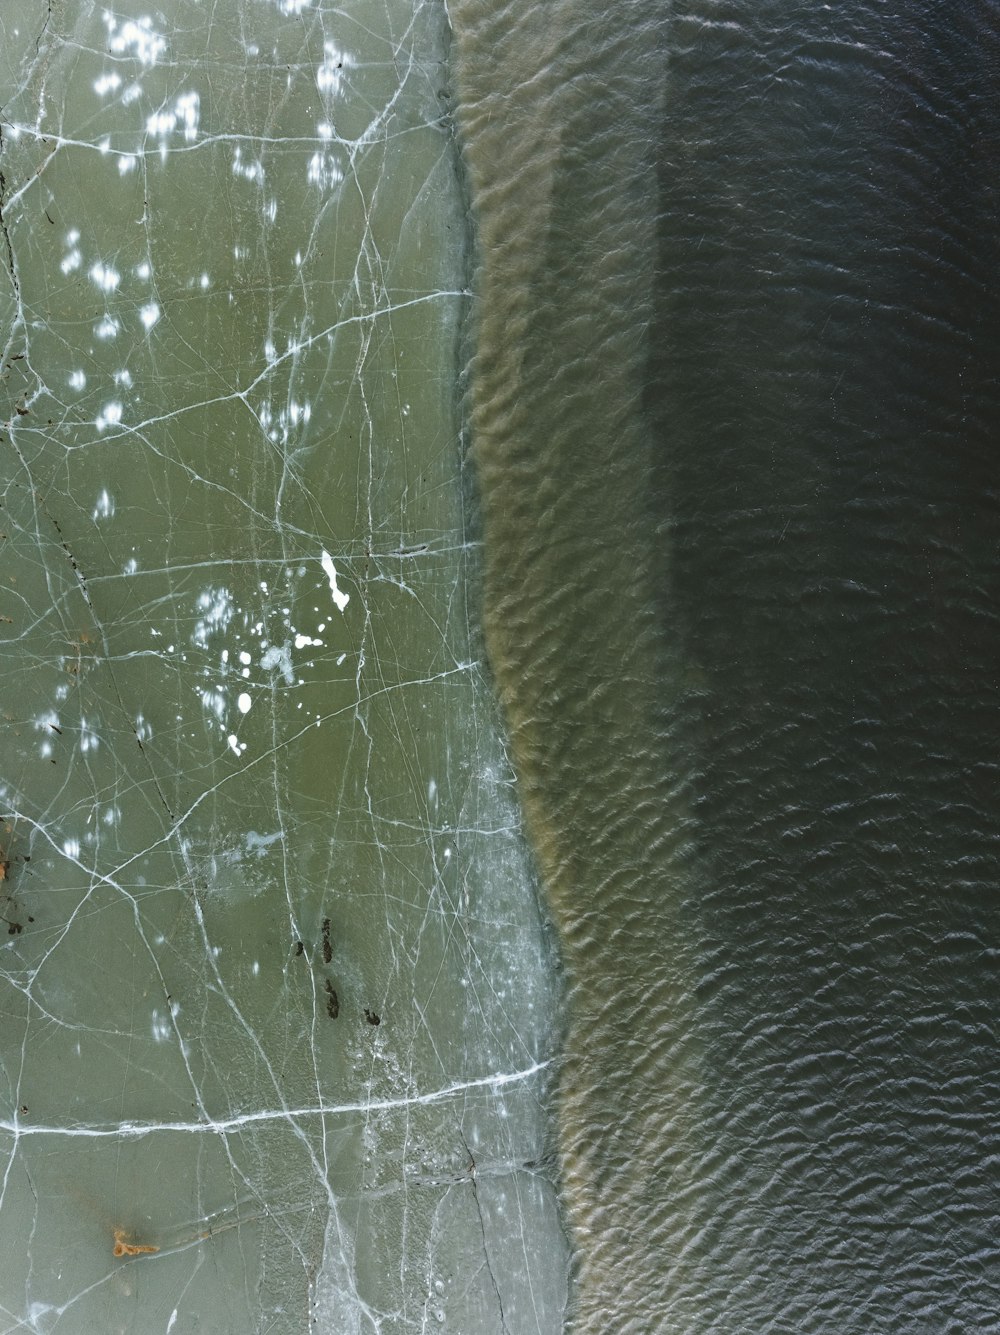 a close up of a piece of glass